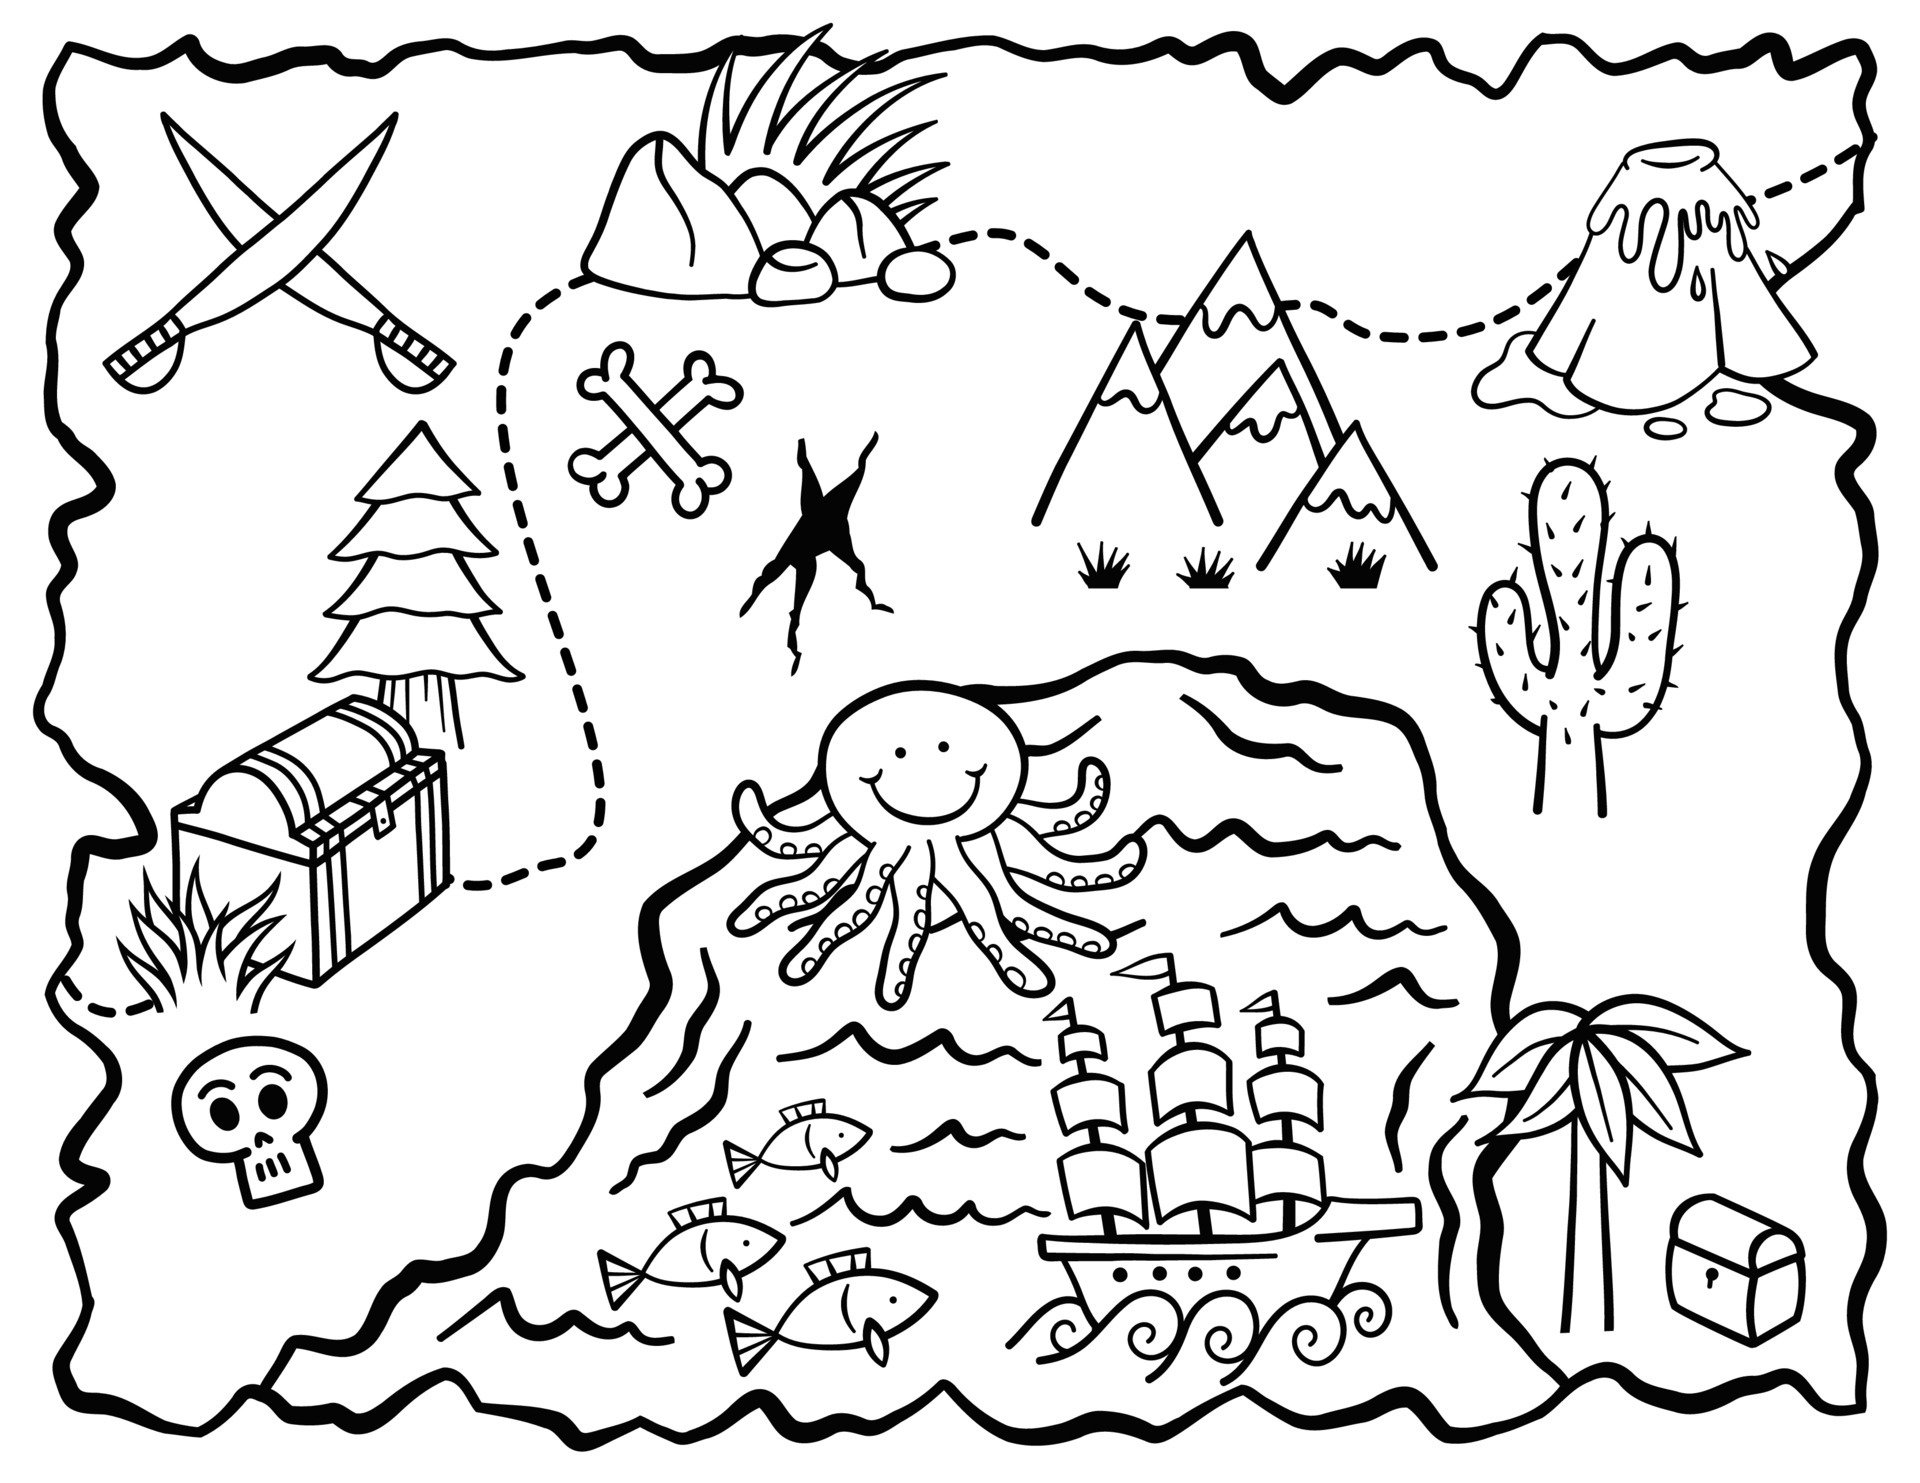 Adventure Treasure Map Coloring Page Project 6012768 Vector Art At Vecteezy